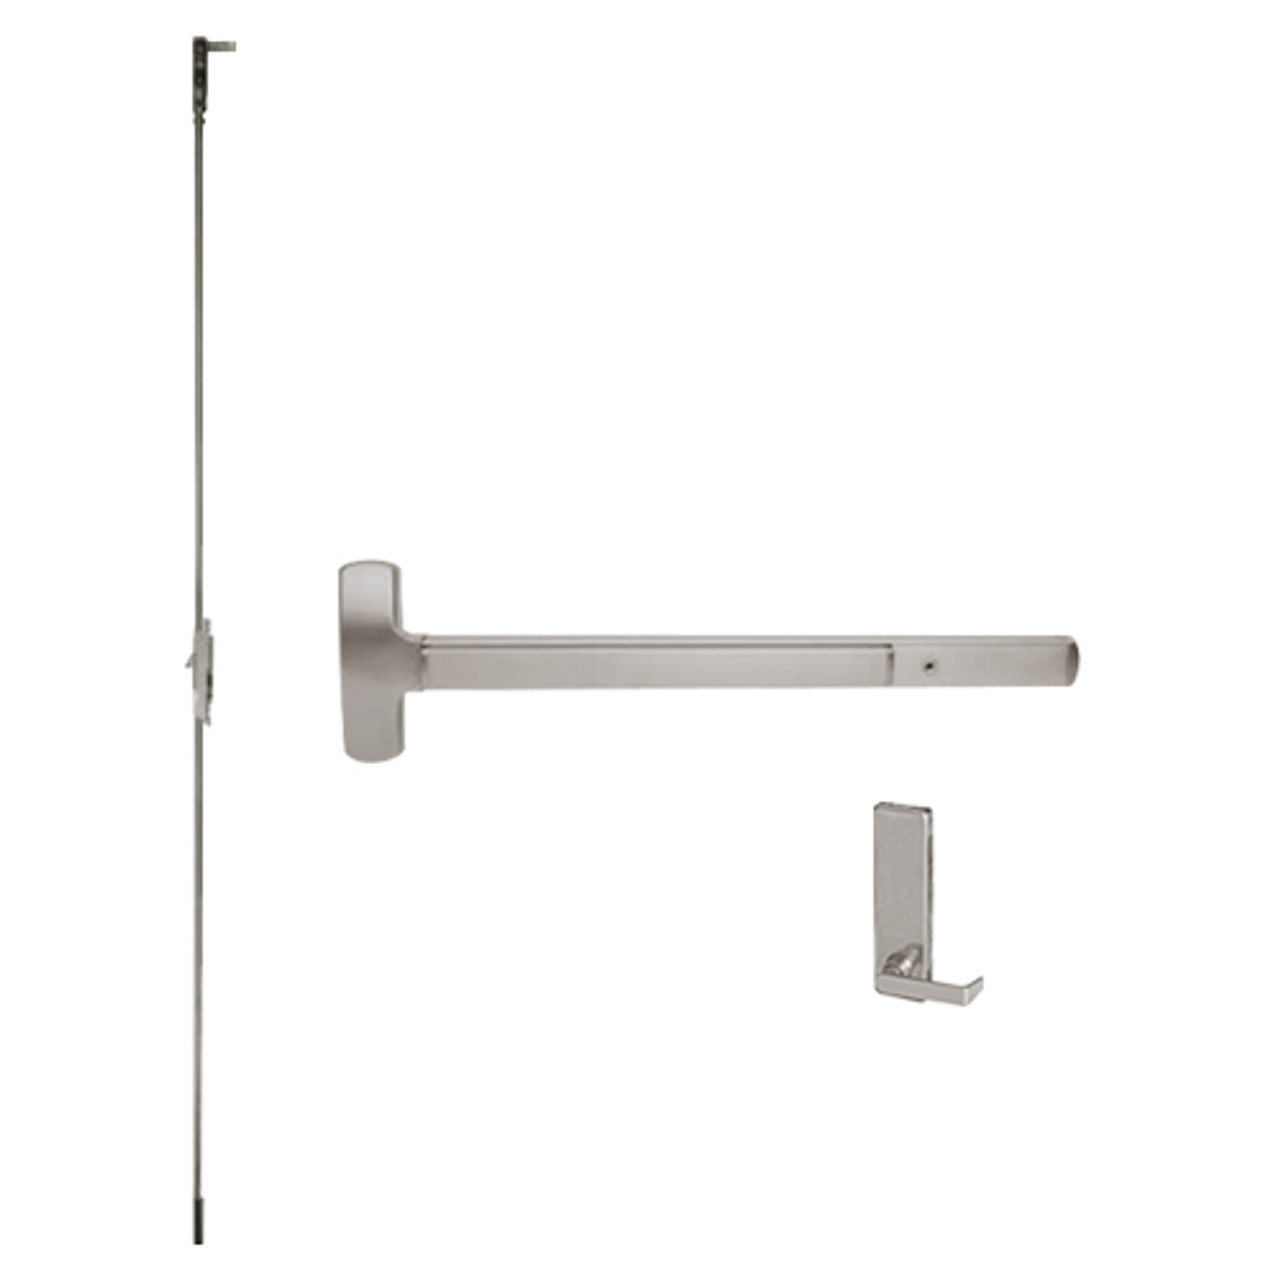 25-C-L-BE-DANE-US32D-3-LHR Falcon Exit Device in Satin Stainless Steel